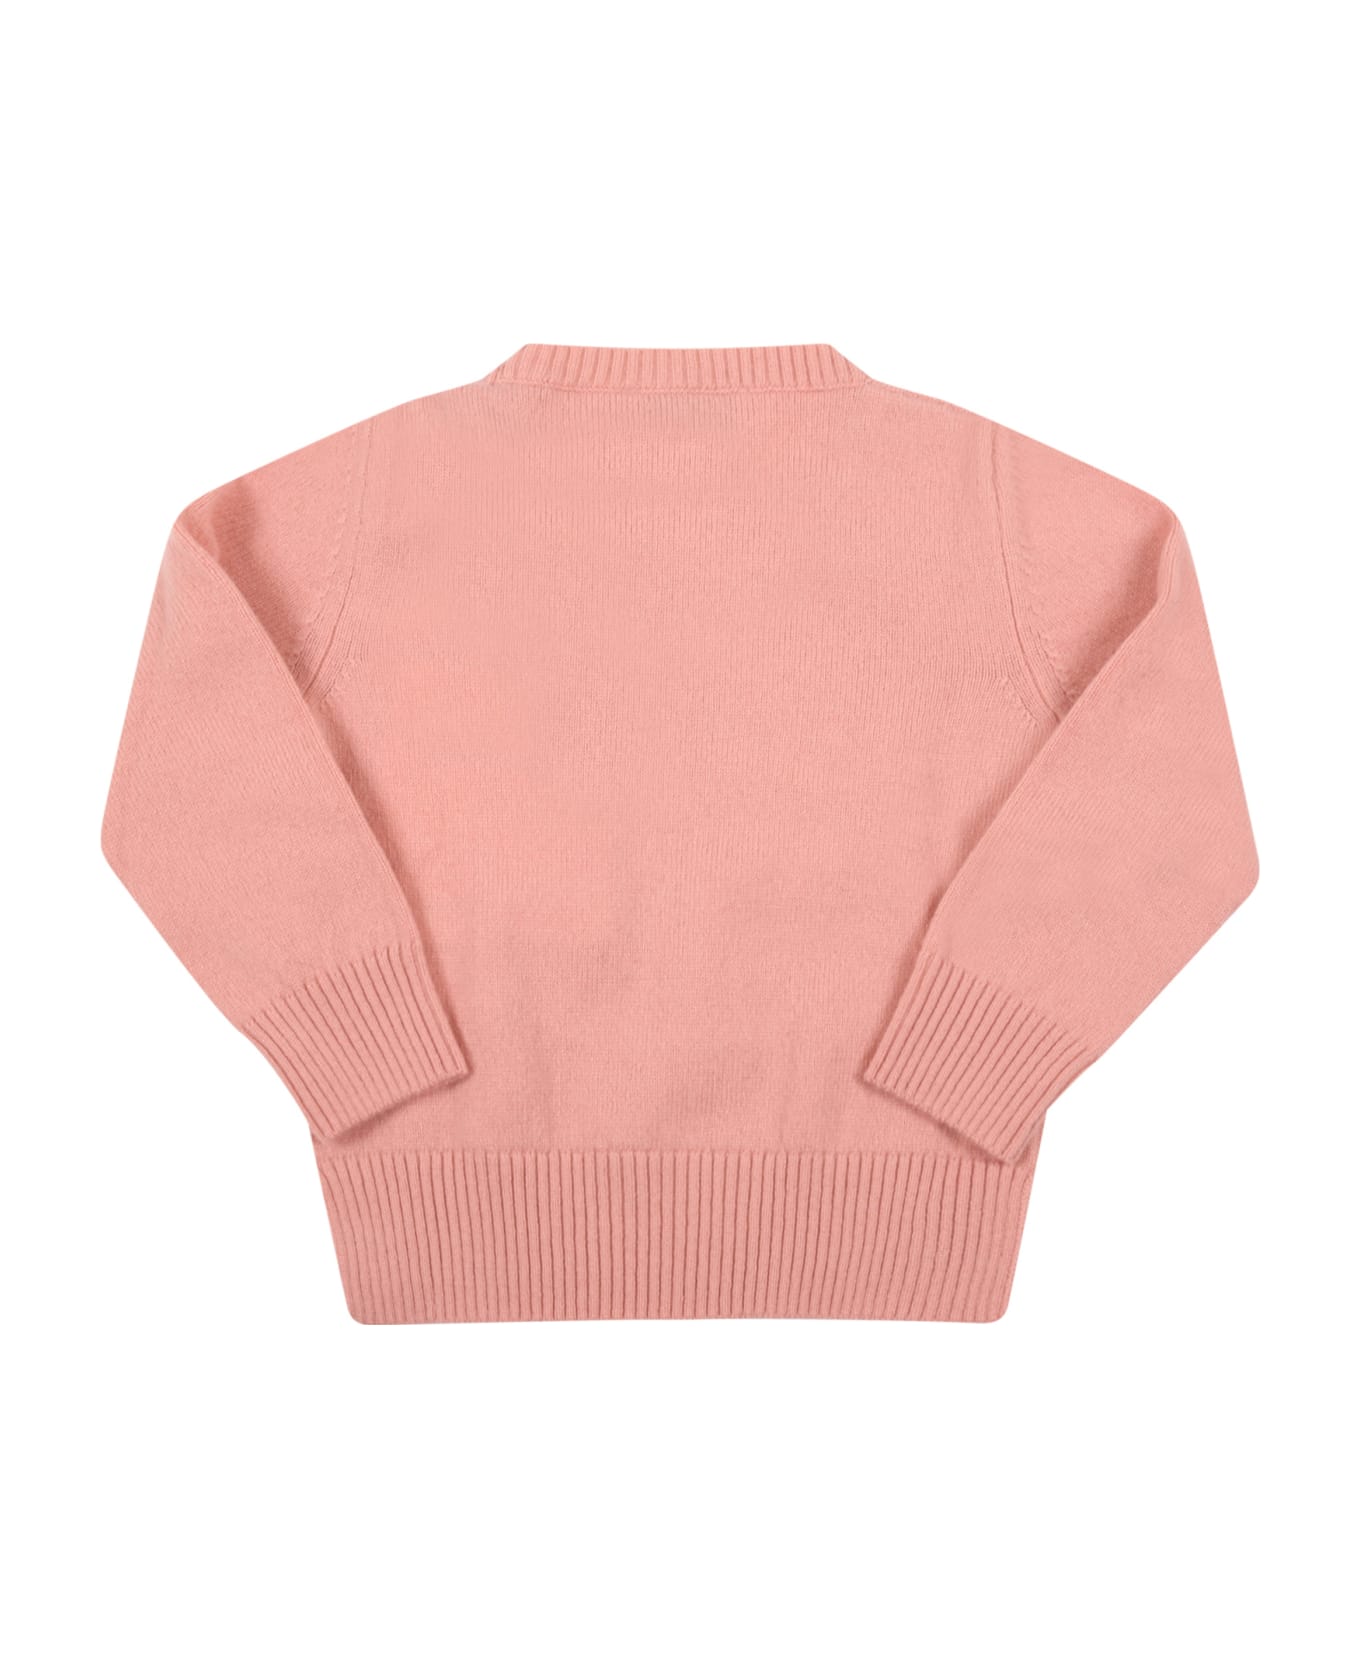 Moncler Pink Sweater For Baby Girl With Logo - Pink